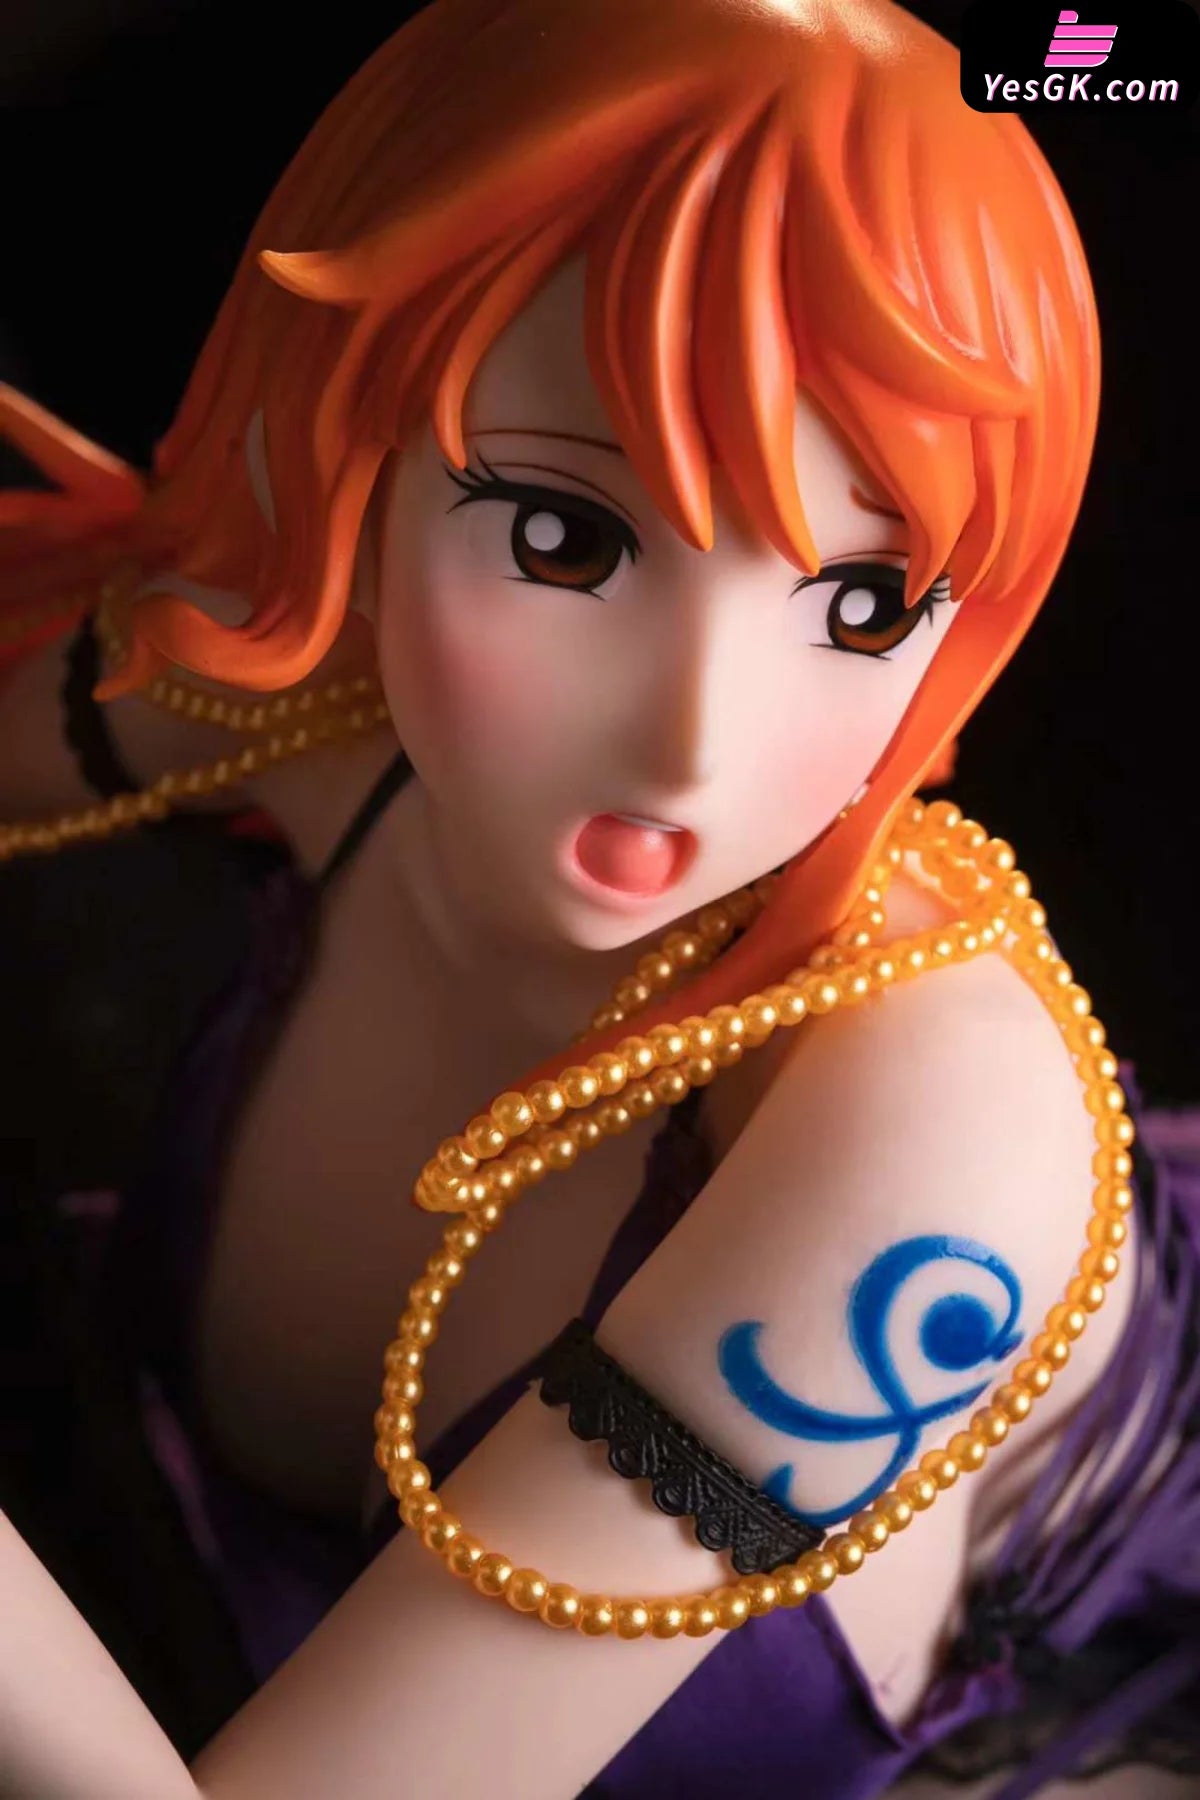 One Piece Nami With Semi Movable Silicone Body Statue - Ling Yun Studio [In-Stock]